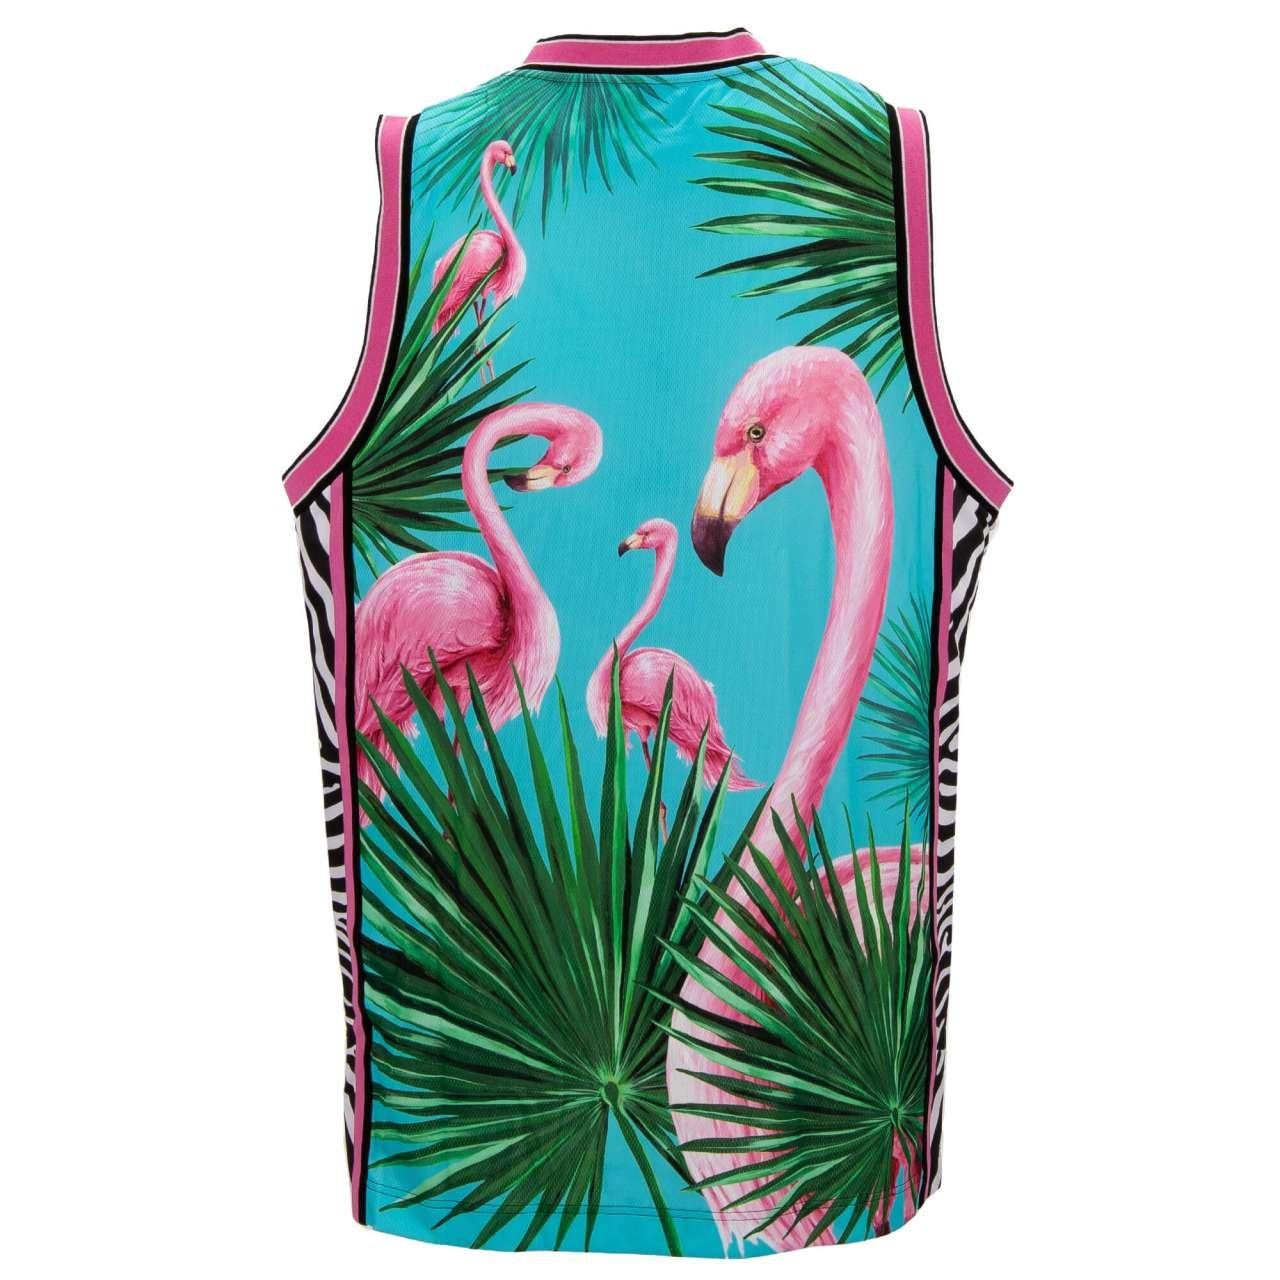 - Oversize Tank Top with Flamingo, Zebra Print and DG Logo Embroidery by DOLCE & GABBANA x DJ KHALED Limited Edition - New with tag - MADE IN ITALY - Former RRP: EUR 595 - Oversize F- Modell: I8ABMM-G7BNZ-W1234 - Material: 100% Polyester - Color: